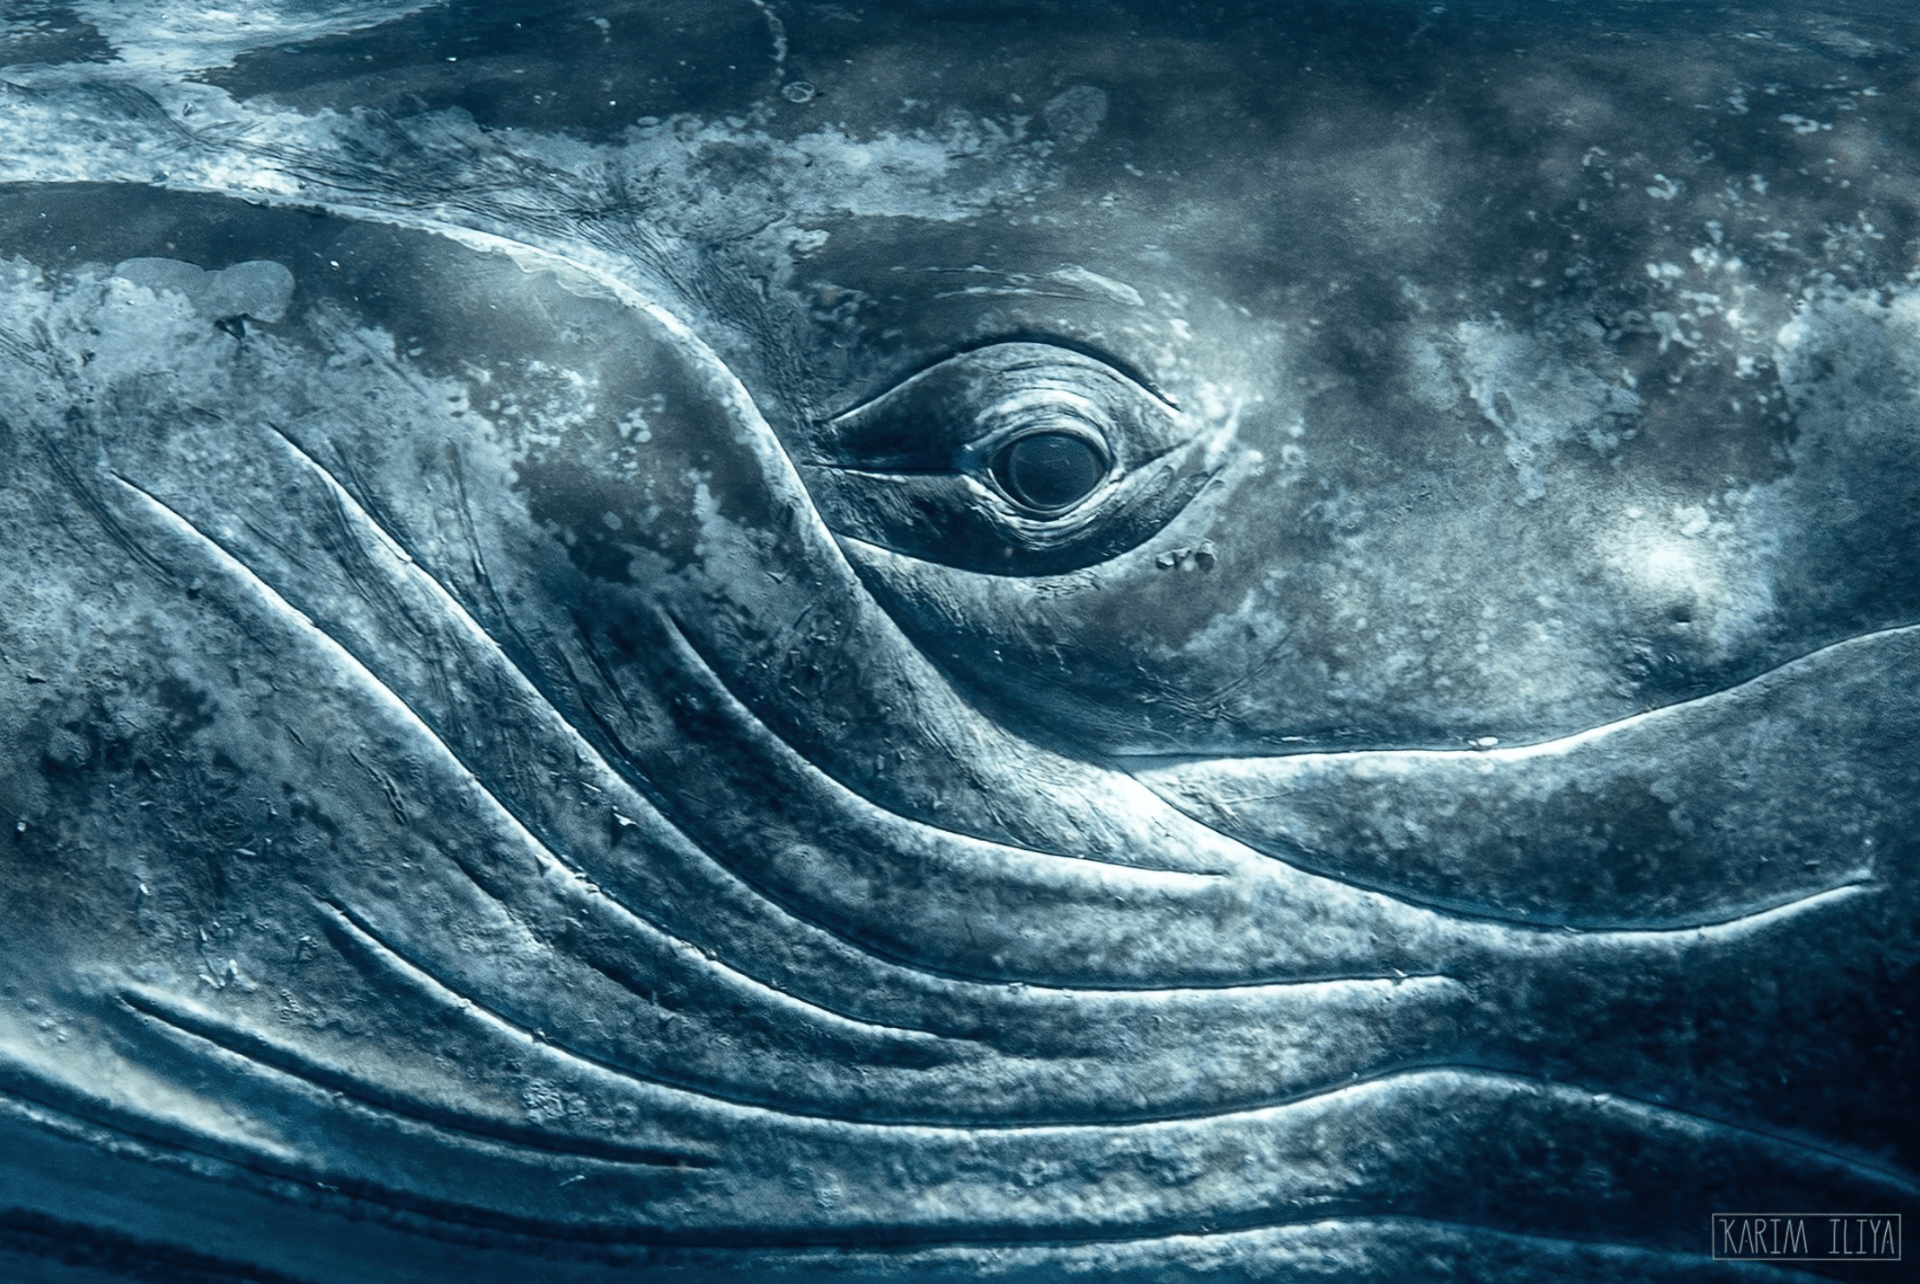 the eye of a whale